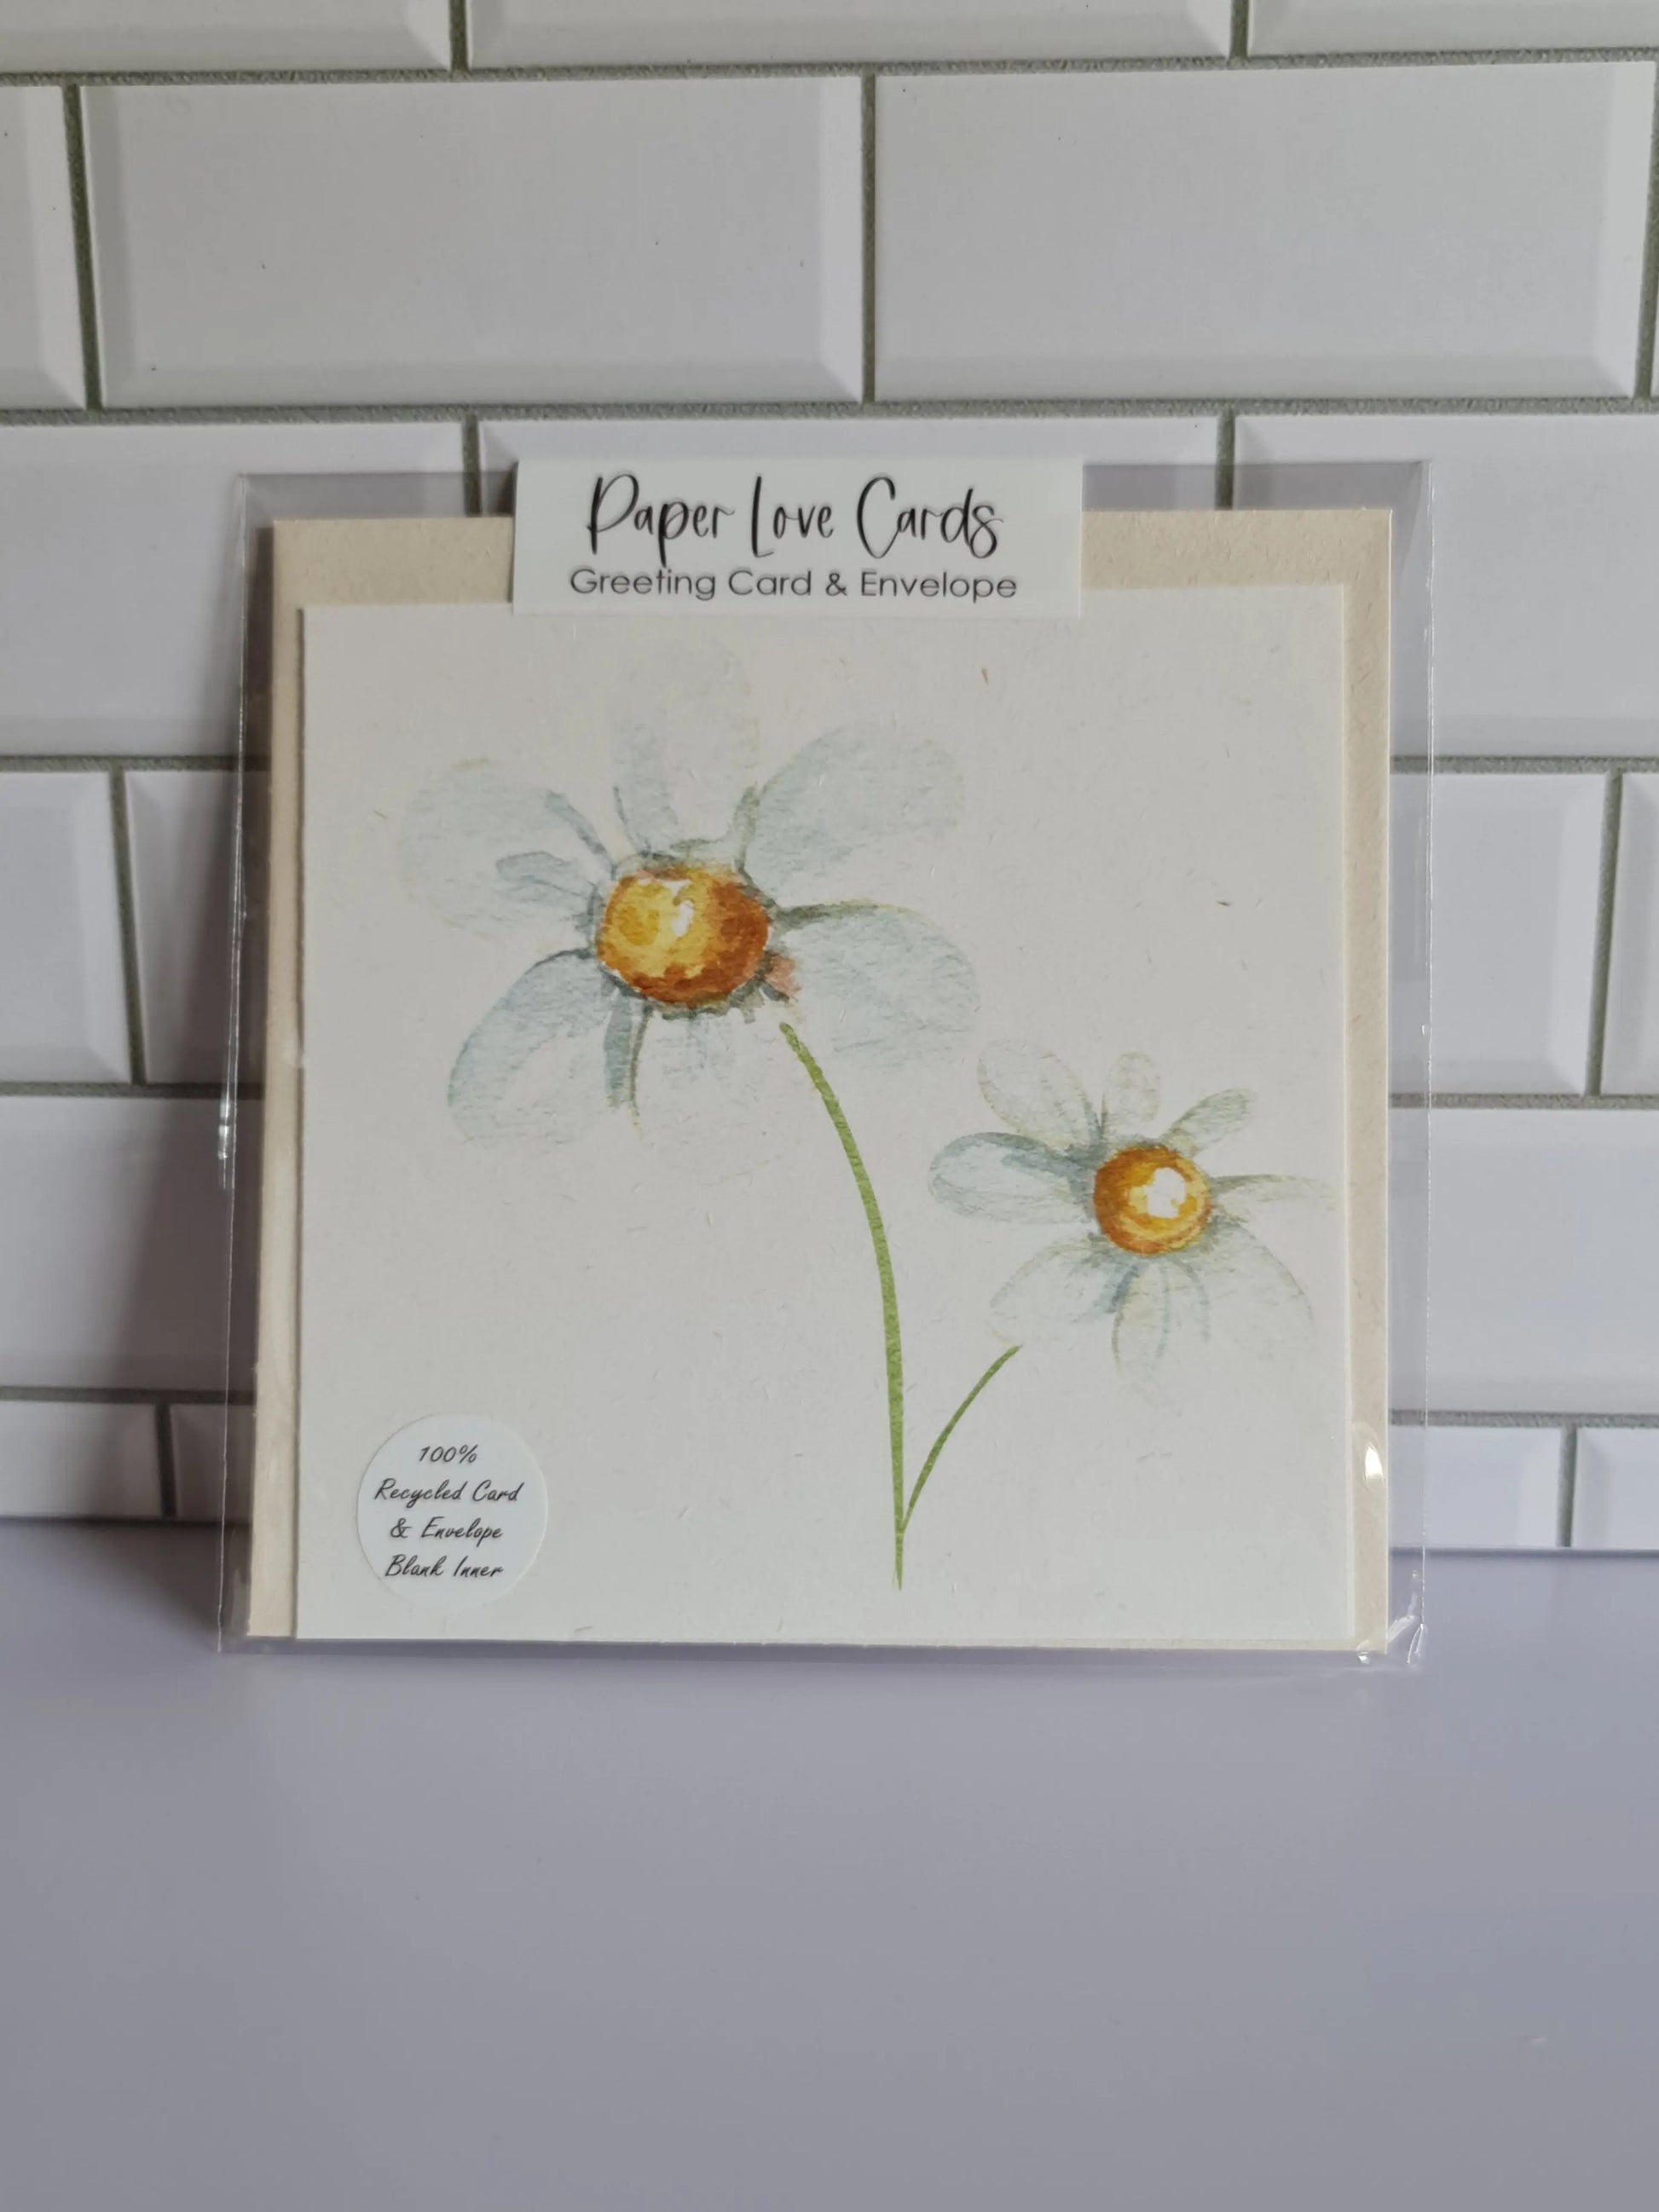 Greeting Card - Chamomile Flower Paper Love Cards